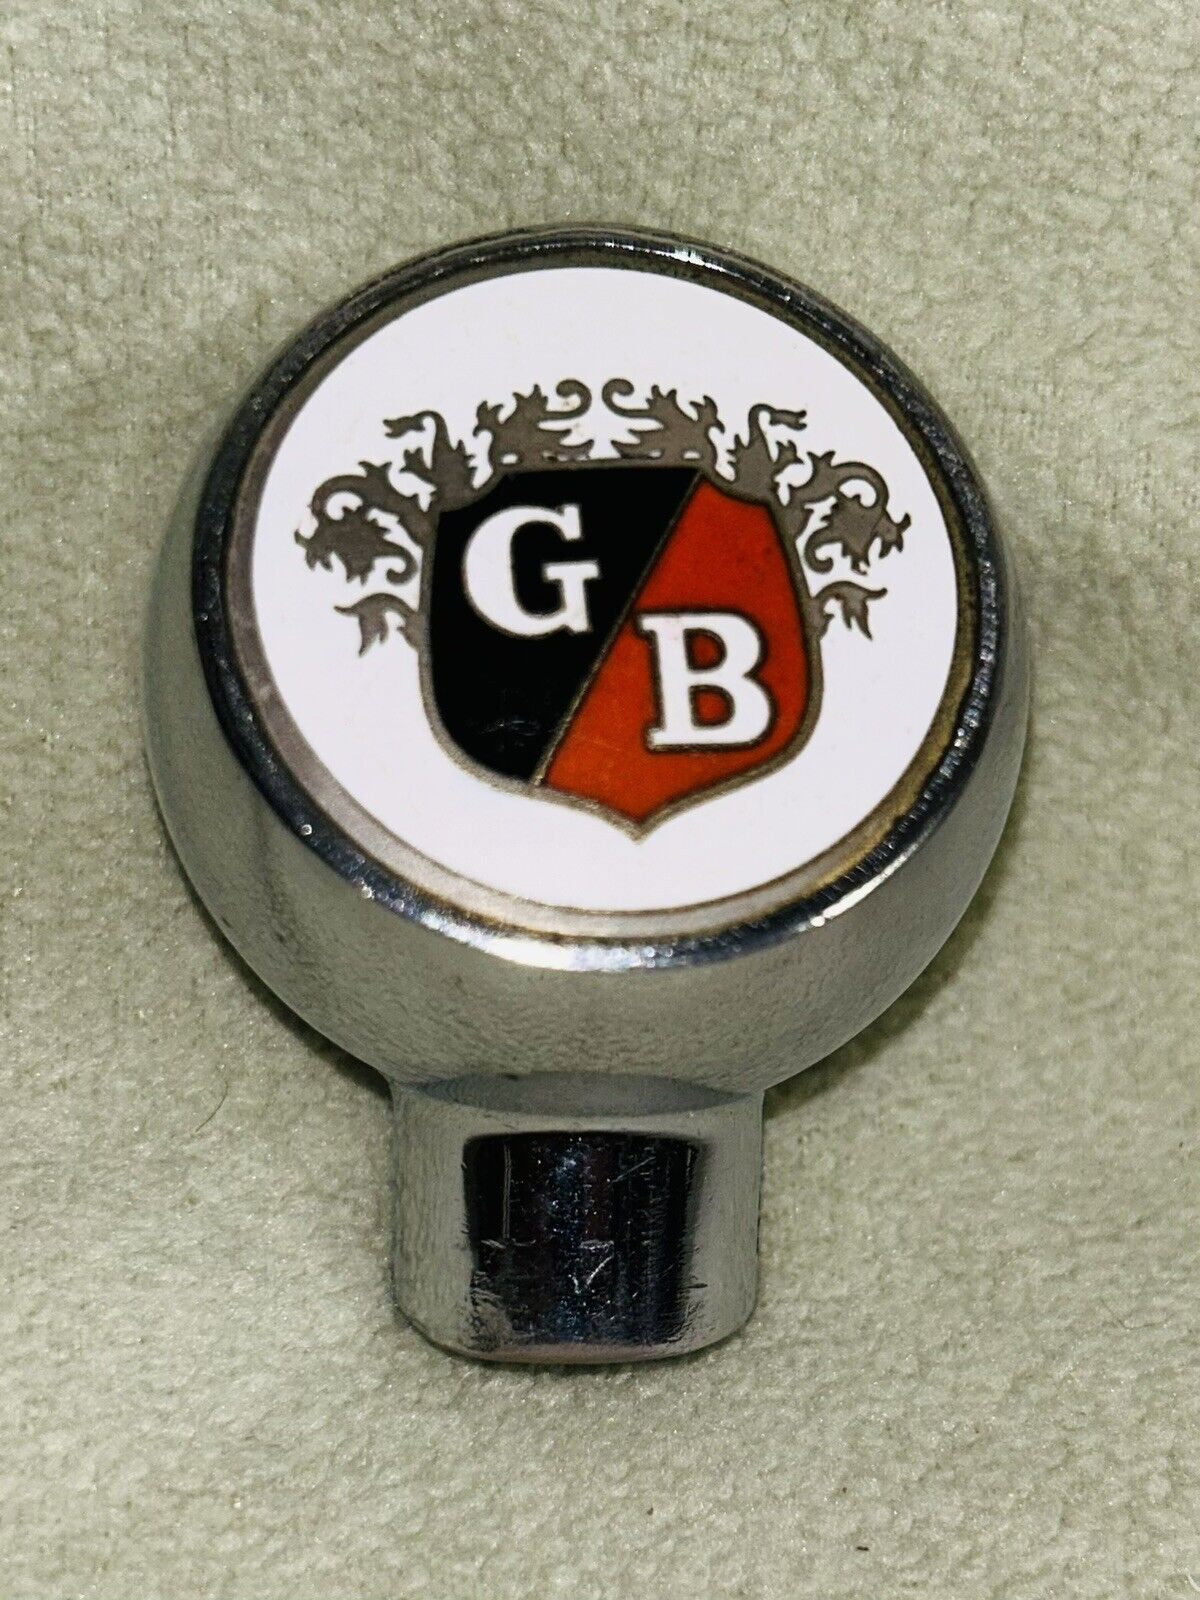 Rare 1950’s Griesedieck Bros. Beer Chrome Steel Ball Shifter Type Tapper Knob